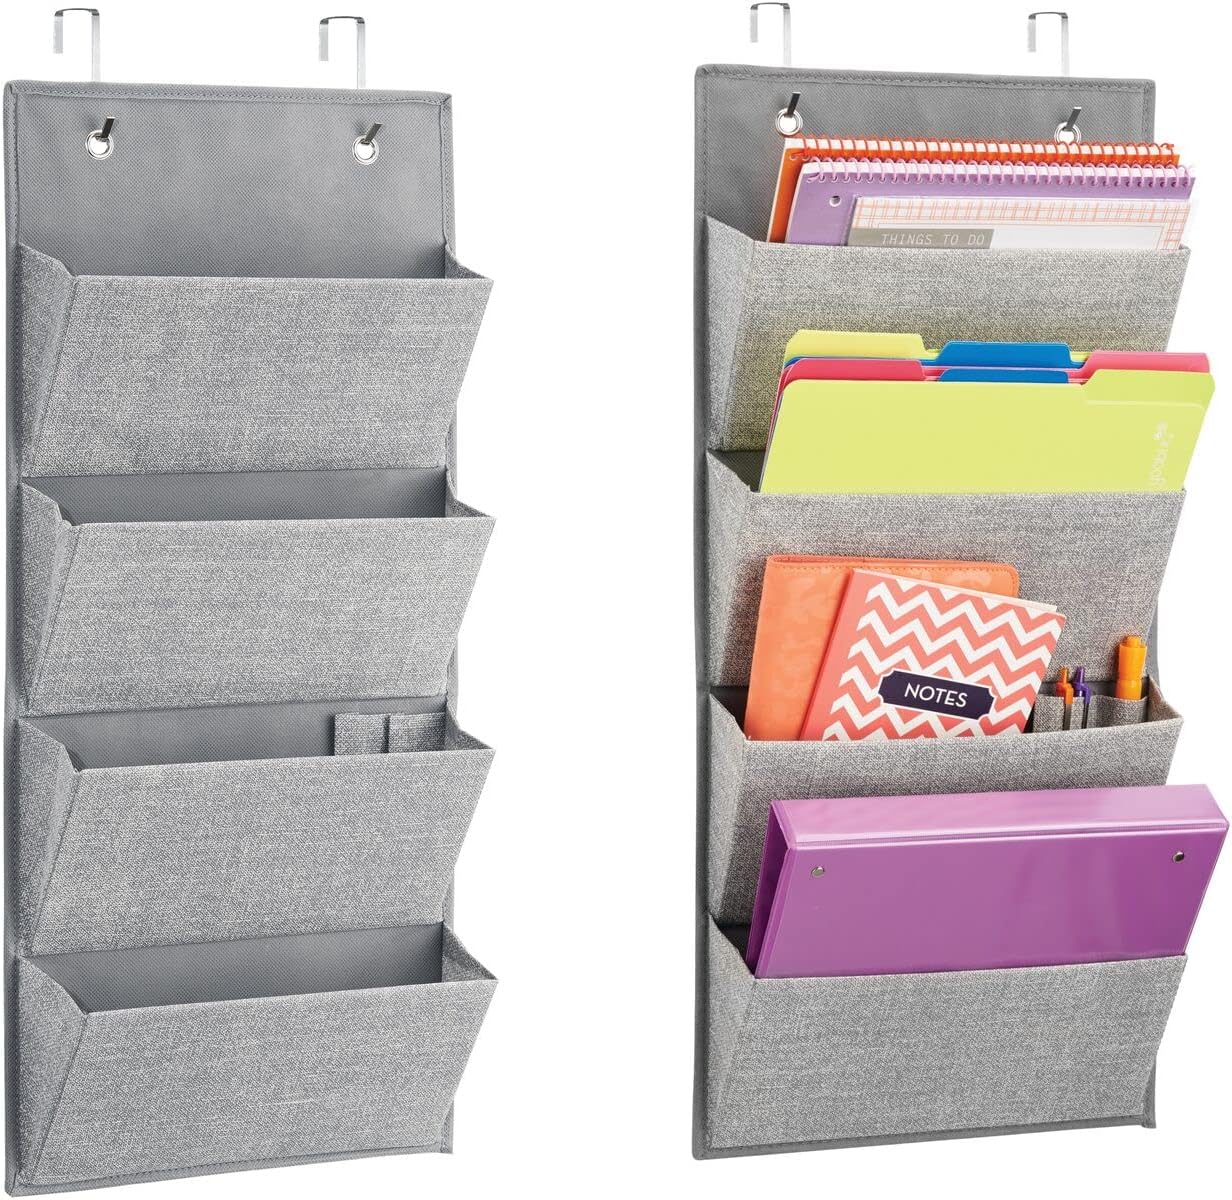 Mdesign Soft Fabric Wall Mount/Over Door Hanging Storage Organizer - 4 Large Cascading Pockets - Holds Office Supplies, Planners, File Folders, Notebooks - Textured Print, 2 Pack - Gray